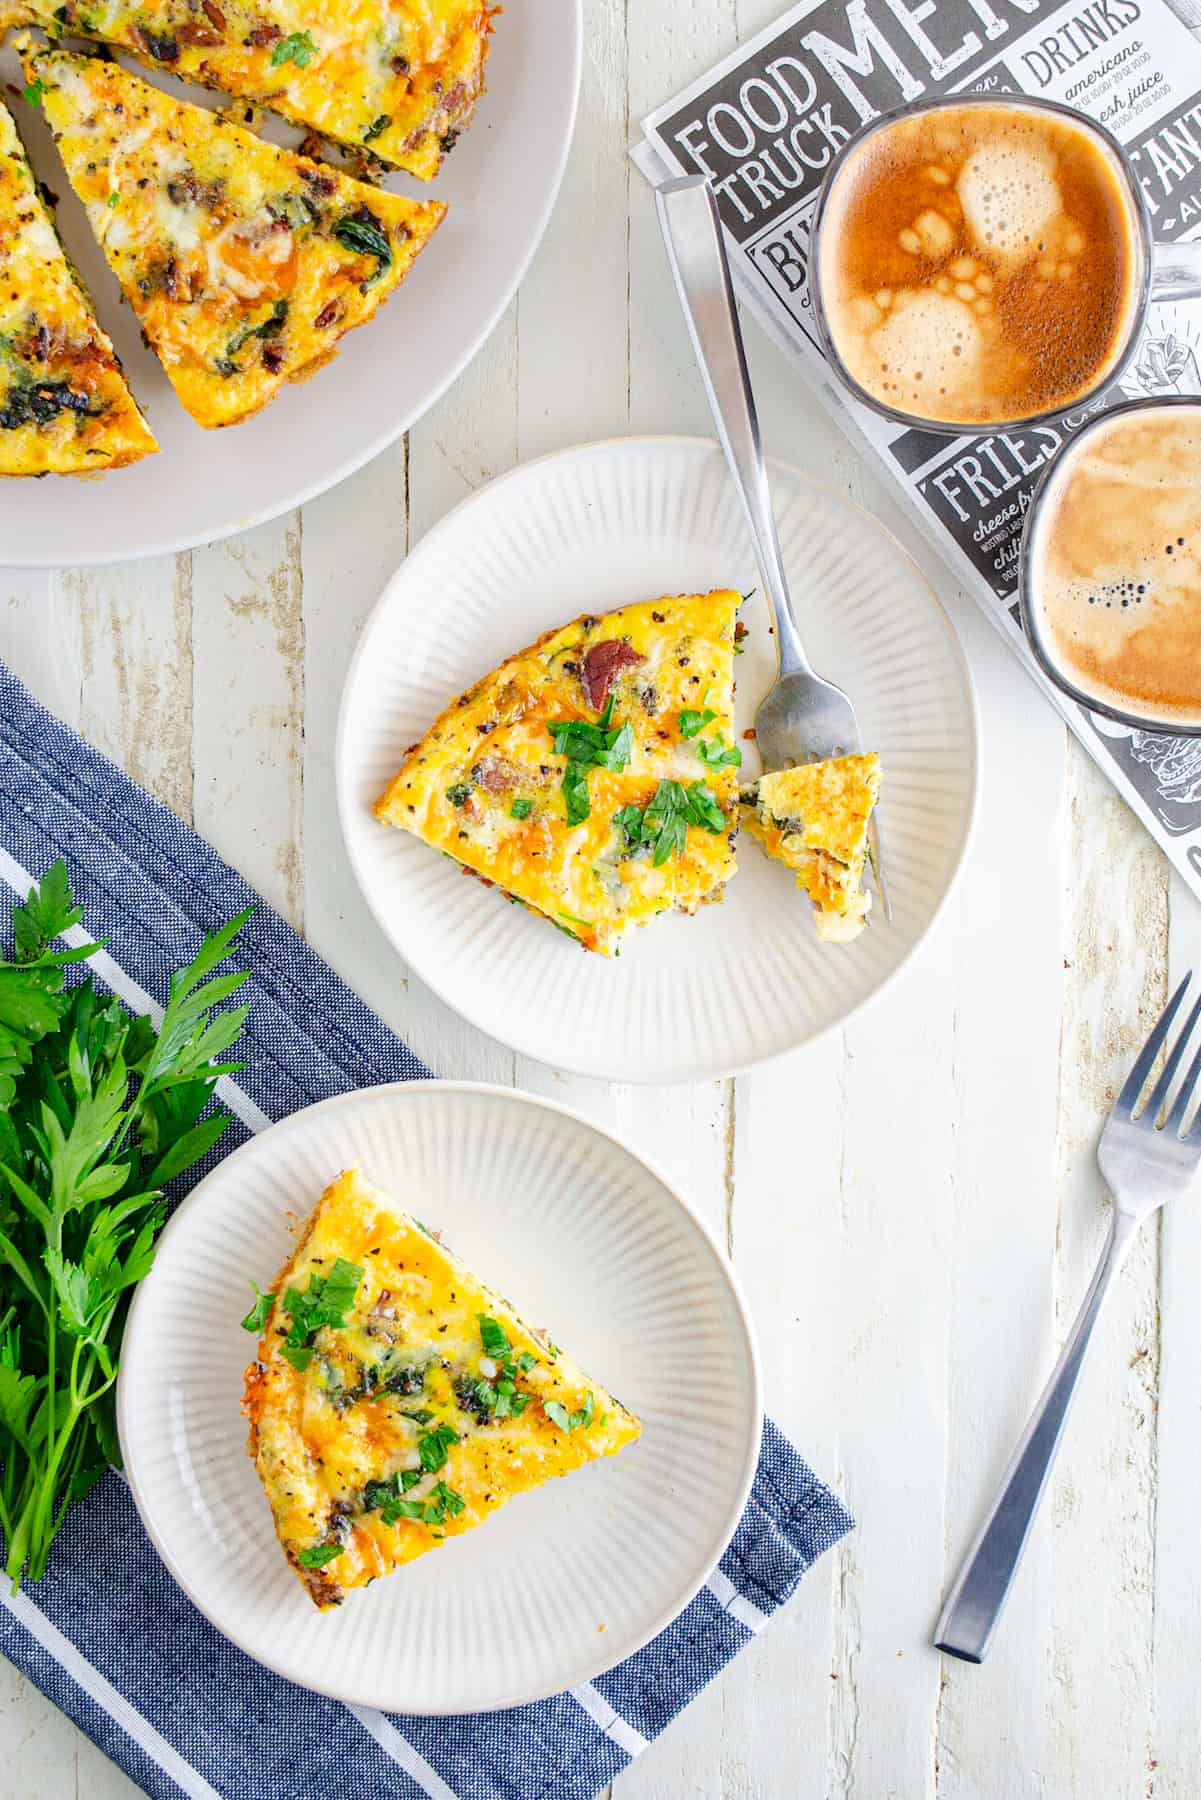 Slices of baked frittata on small white plates garnished with parsley and cheese with a side of lattes.